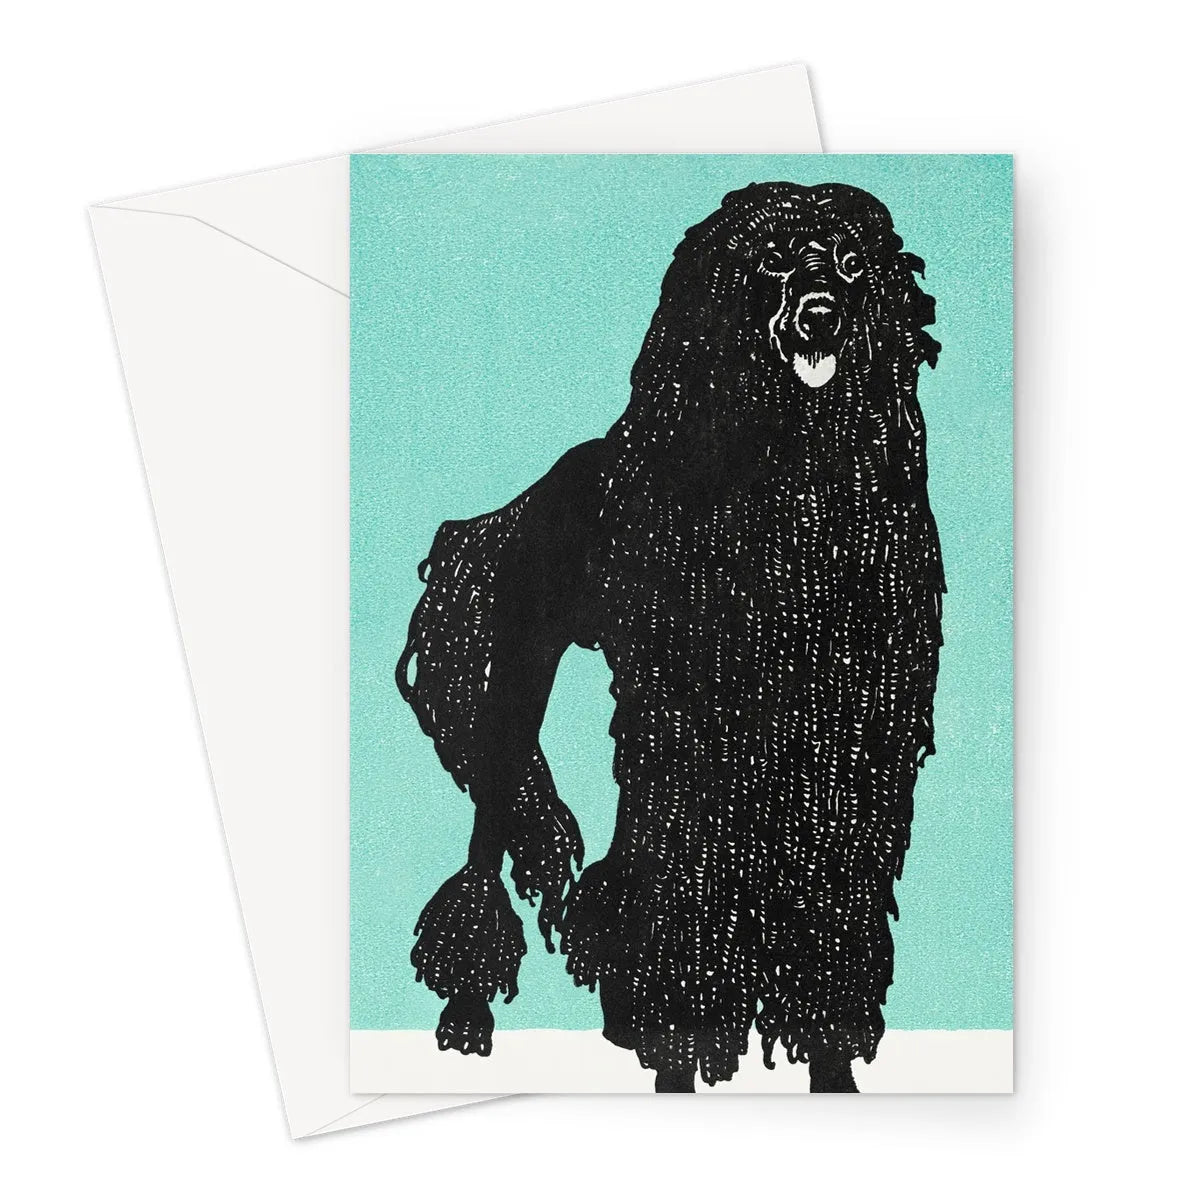 Poodle By Moriz Jung Greeting Card - A5 Portrait / 1 Card - Greeting & Note Cards - Aesthetic Art